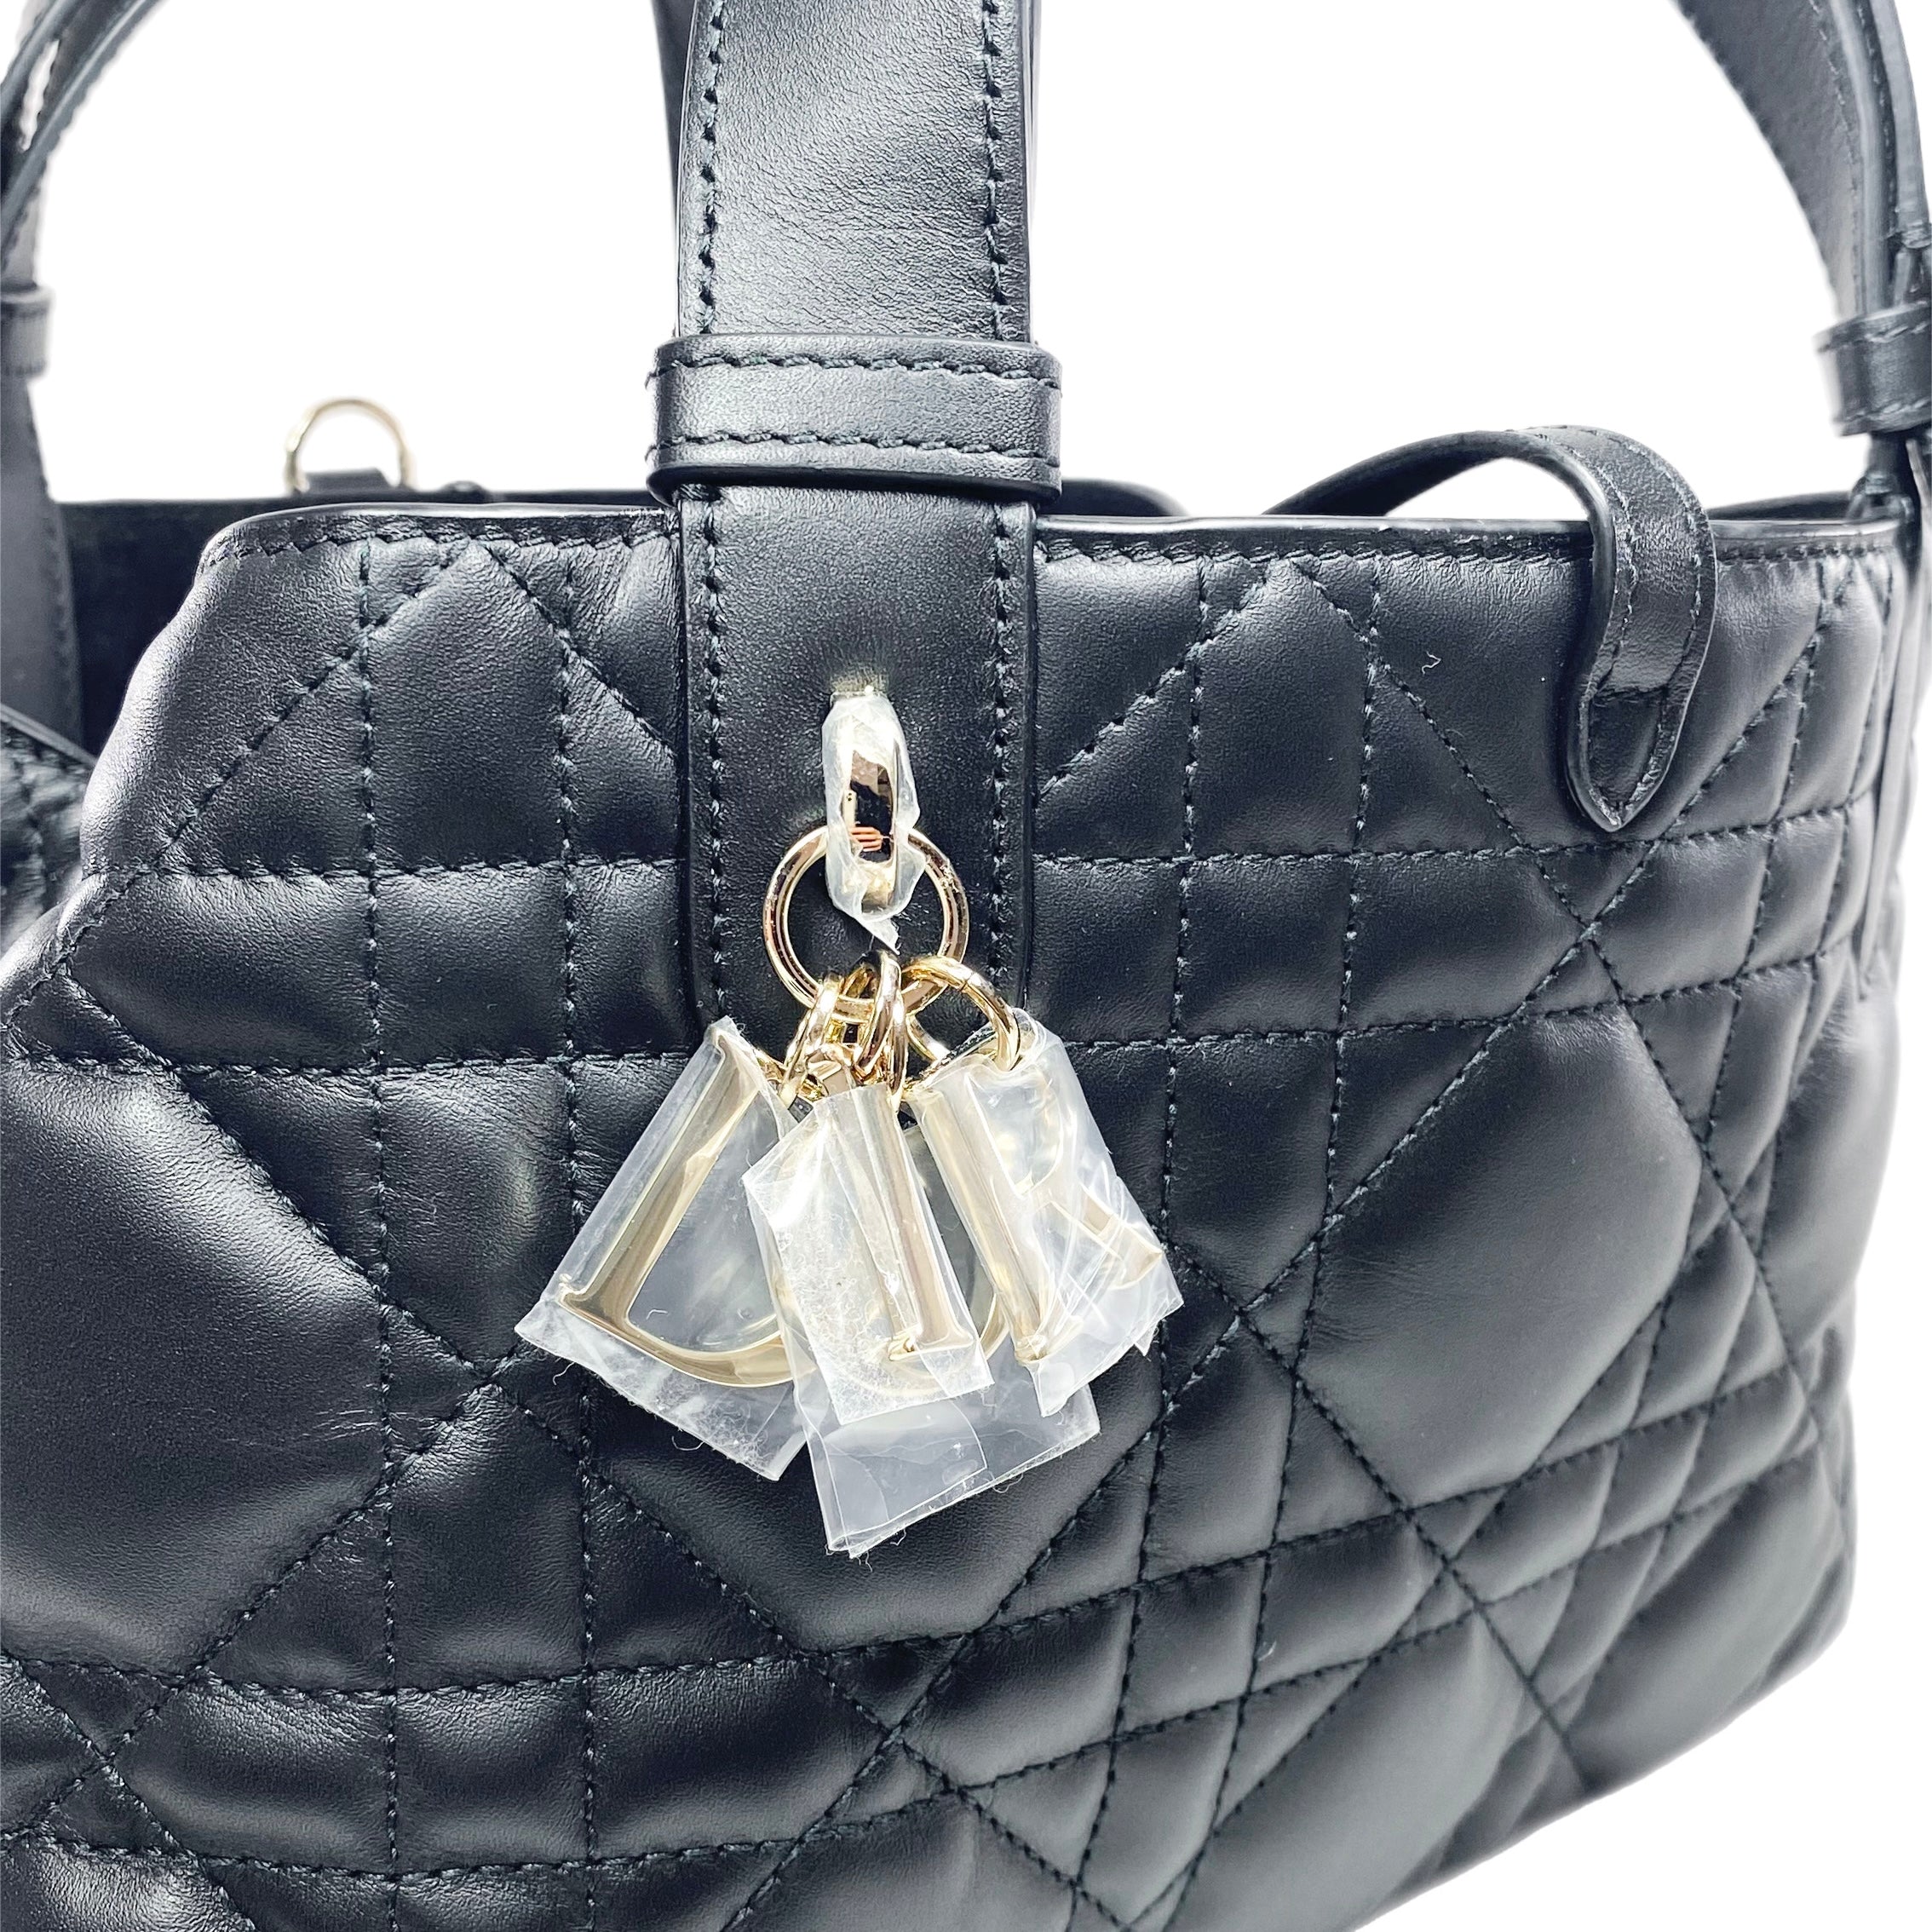 Dior Black Small Toujours Bag